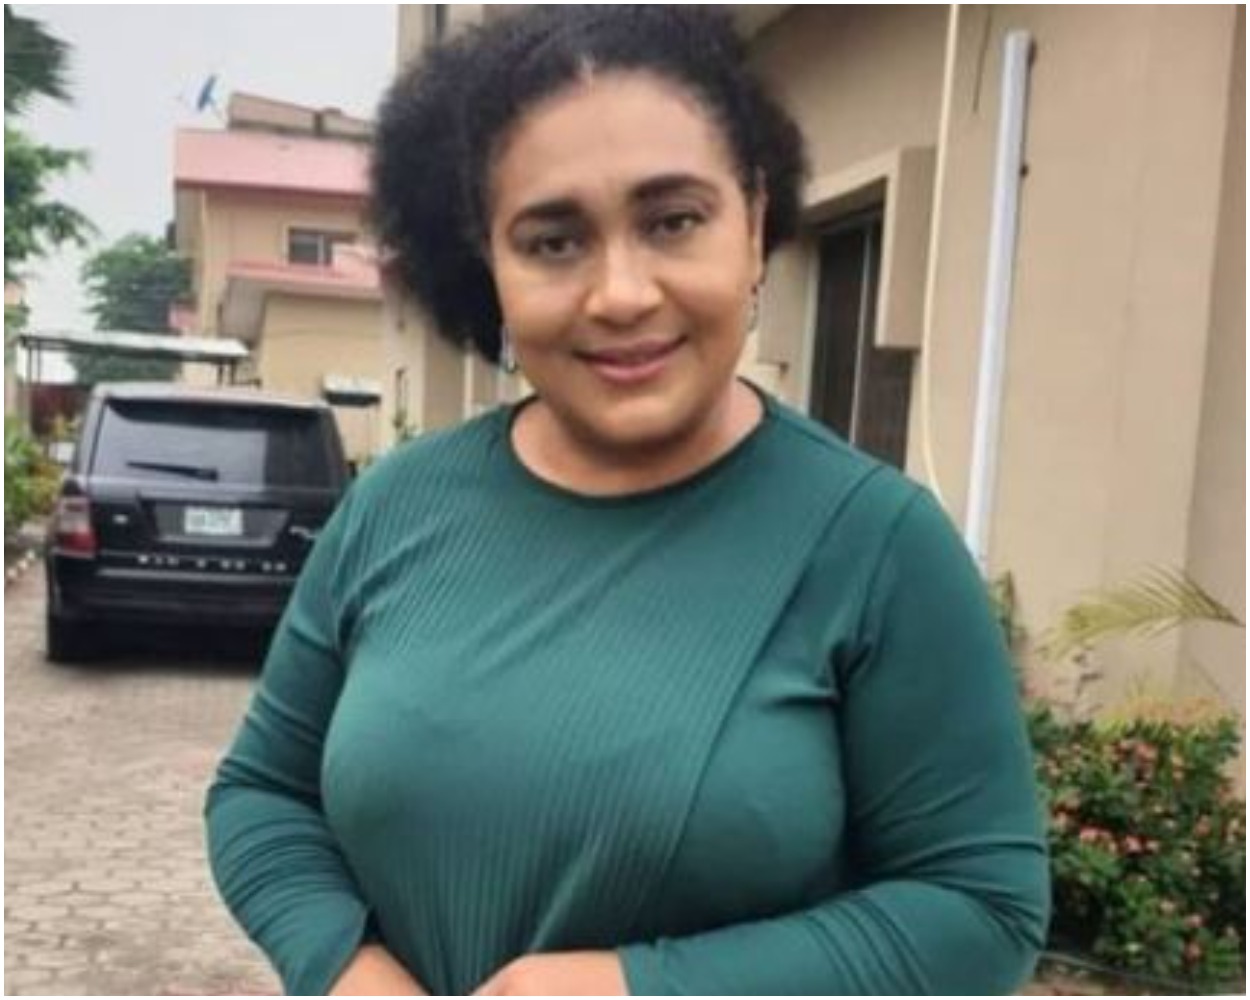 Hilda Dokubo Condemns Celebrities Over Leaked Sex Videos, Nude Pictures